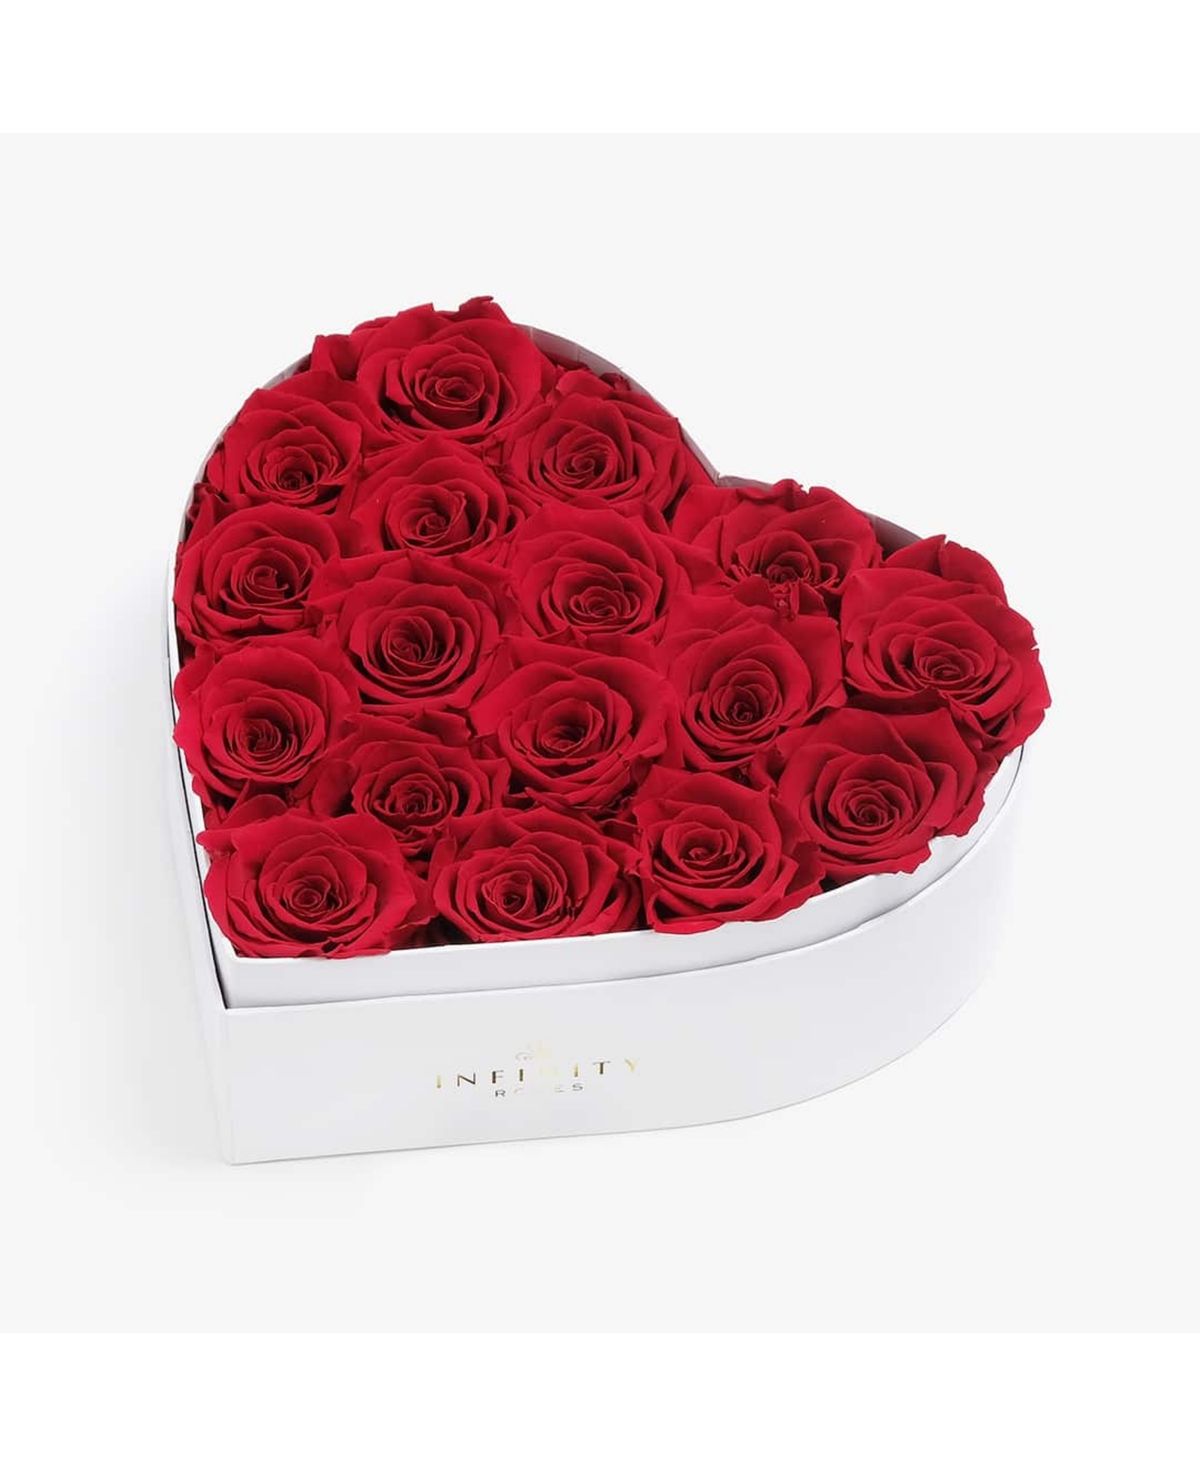 Heart Box of 17 Red Real Roses Preserved to Last Over a Year - Red